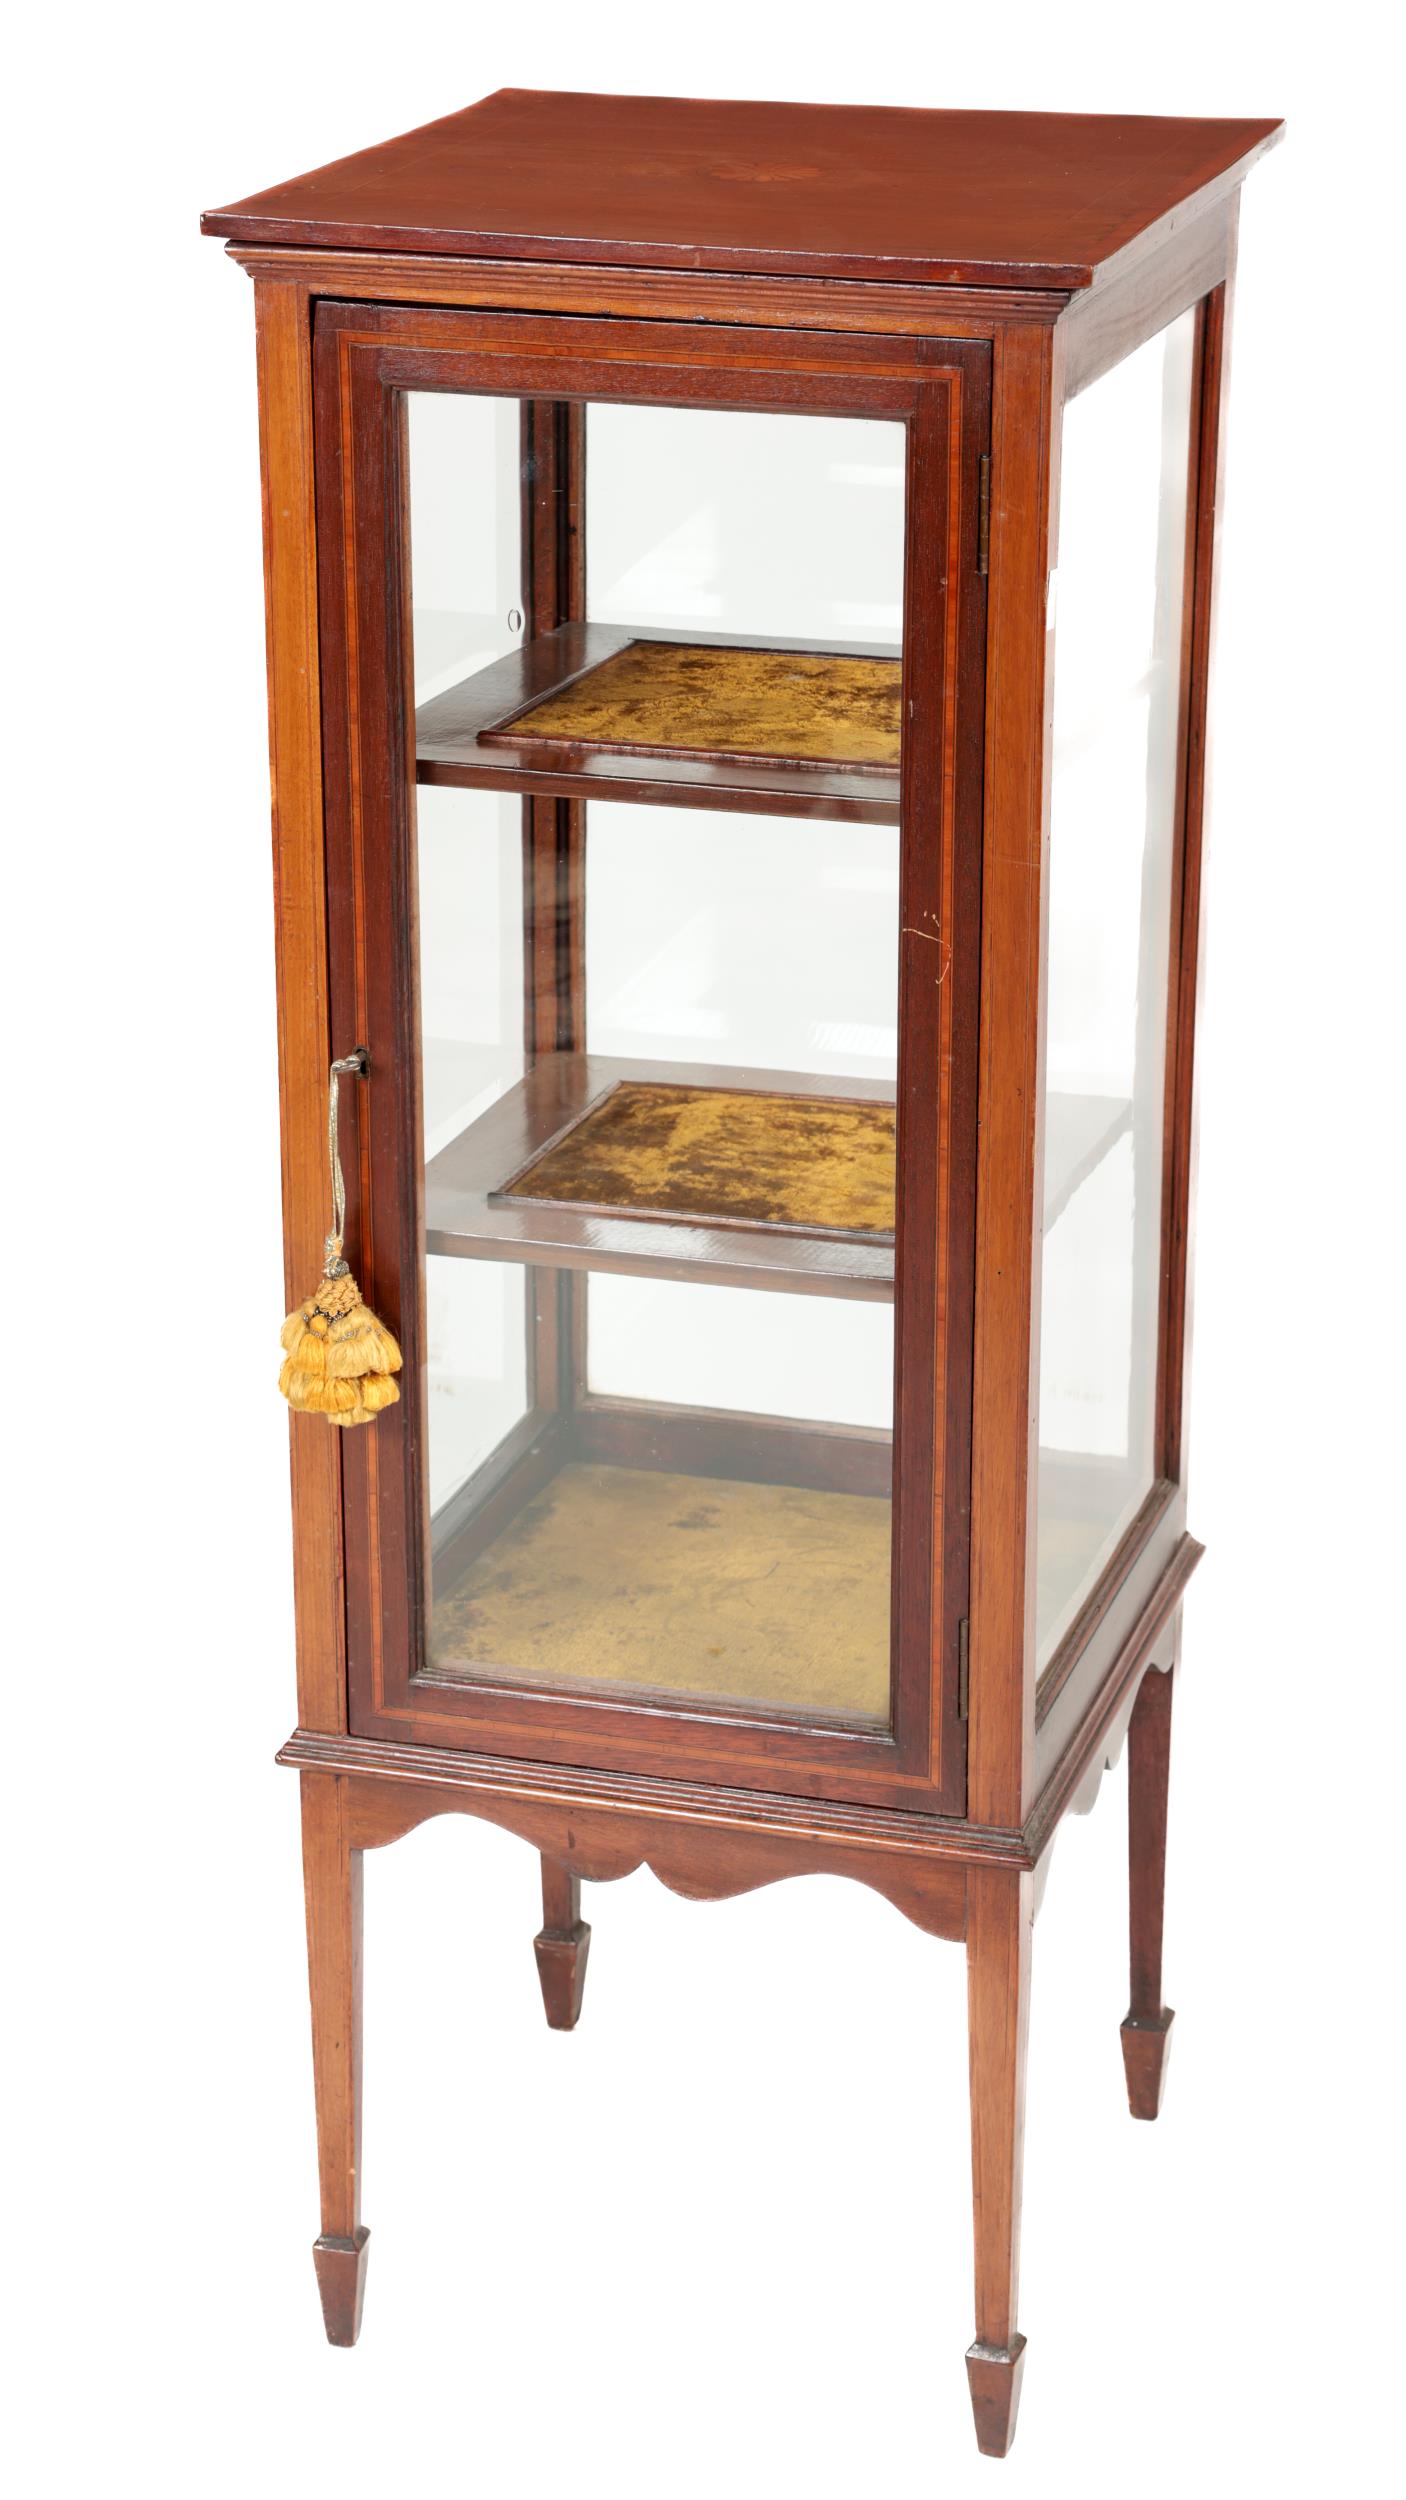 An Edwardian upright and free standing Display Cabinet, the square top with central inlay design